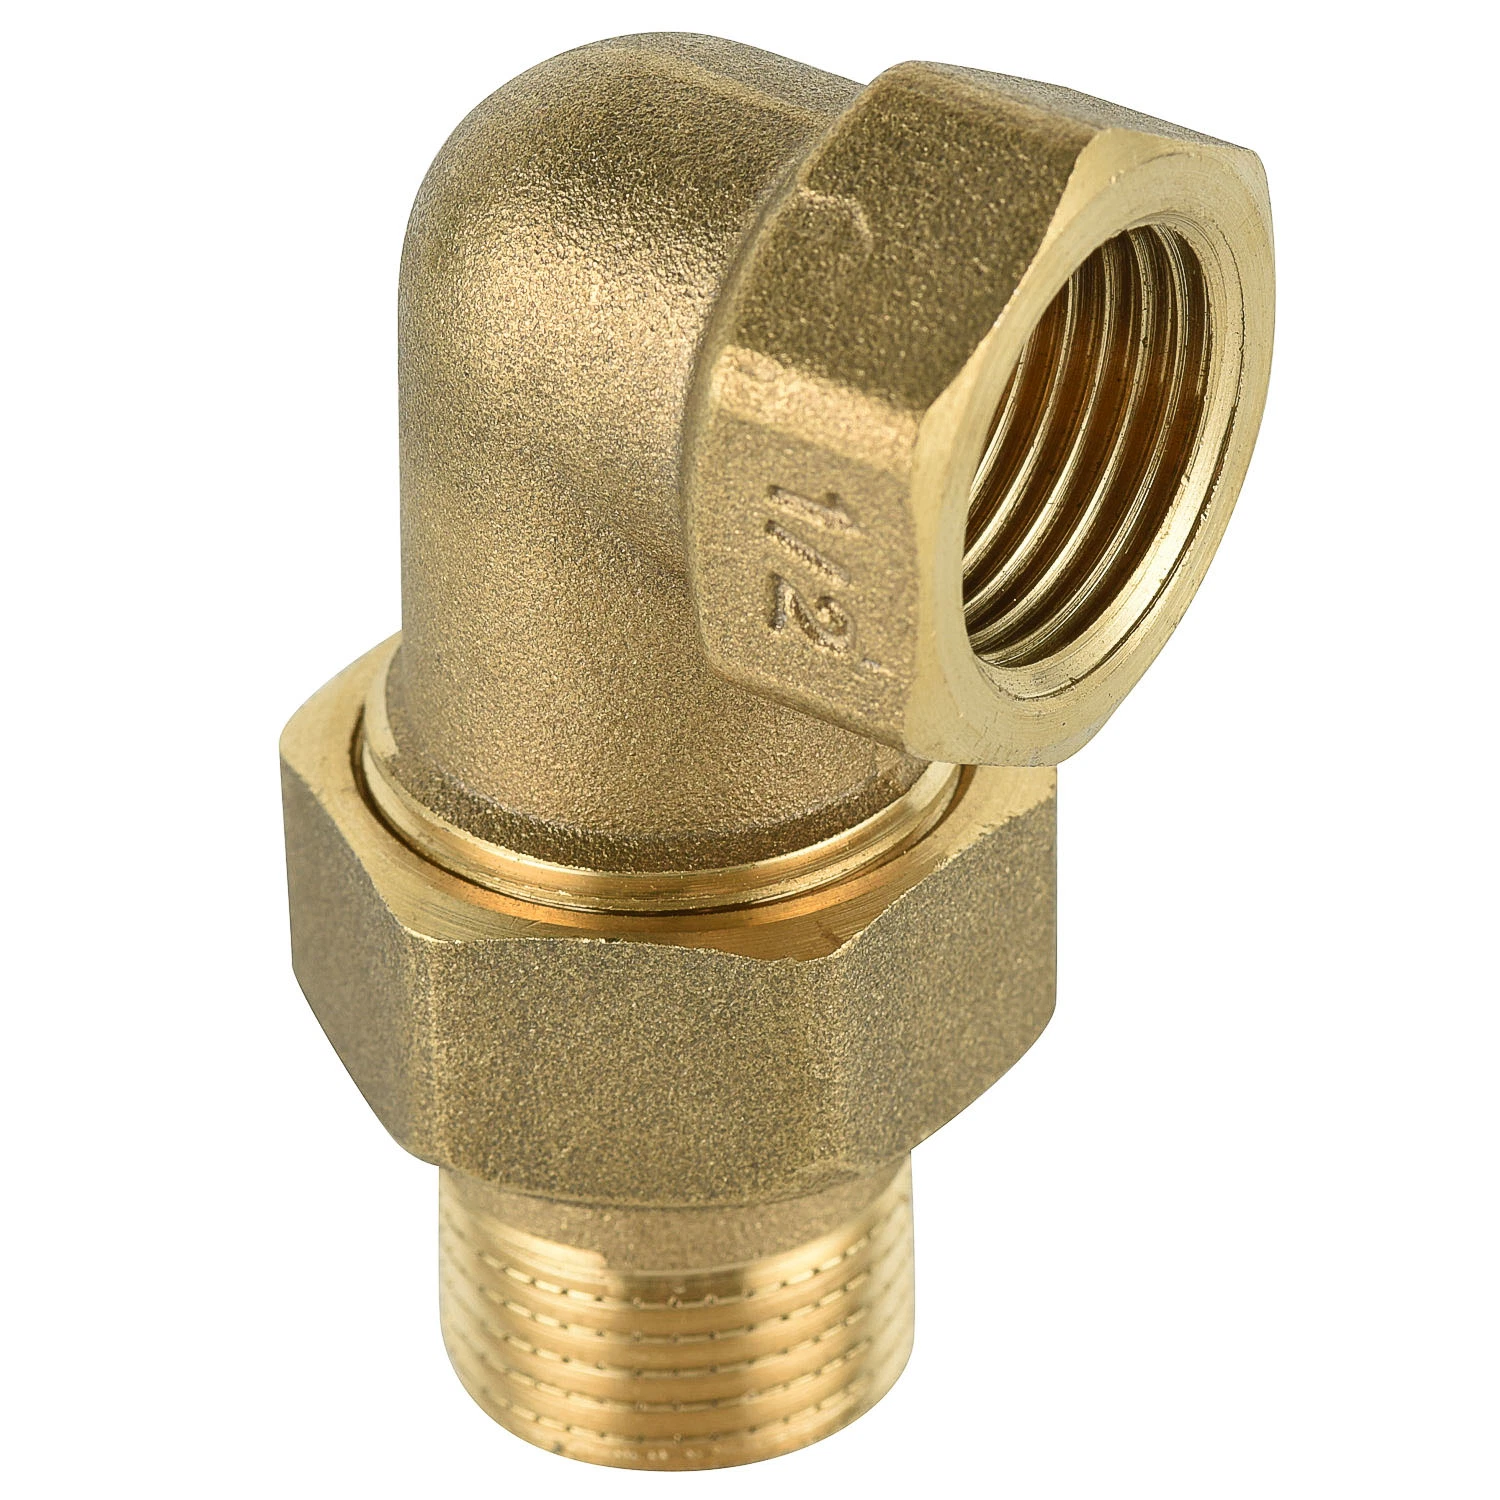 Brass Screw Fitting for Plumbing Pipe Fittings Straight Union O-Ring Sealed